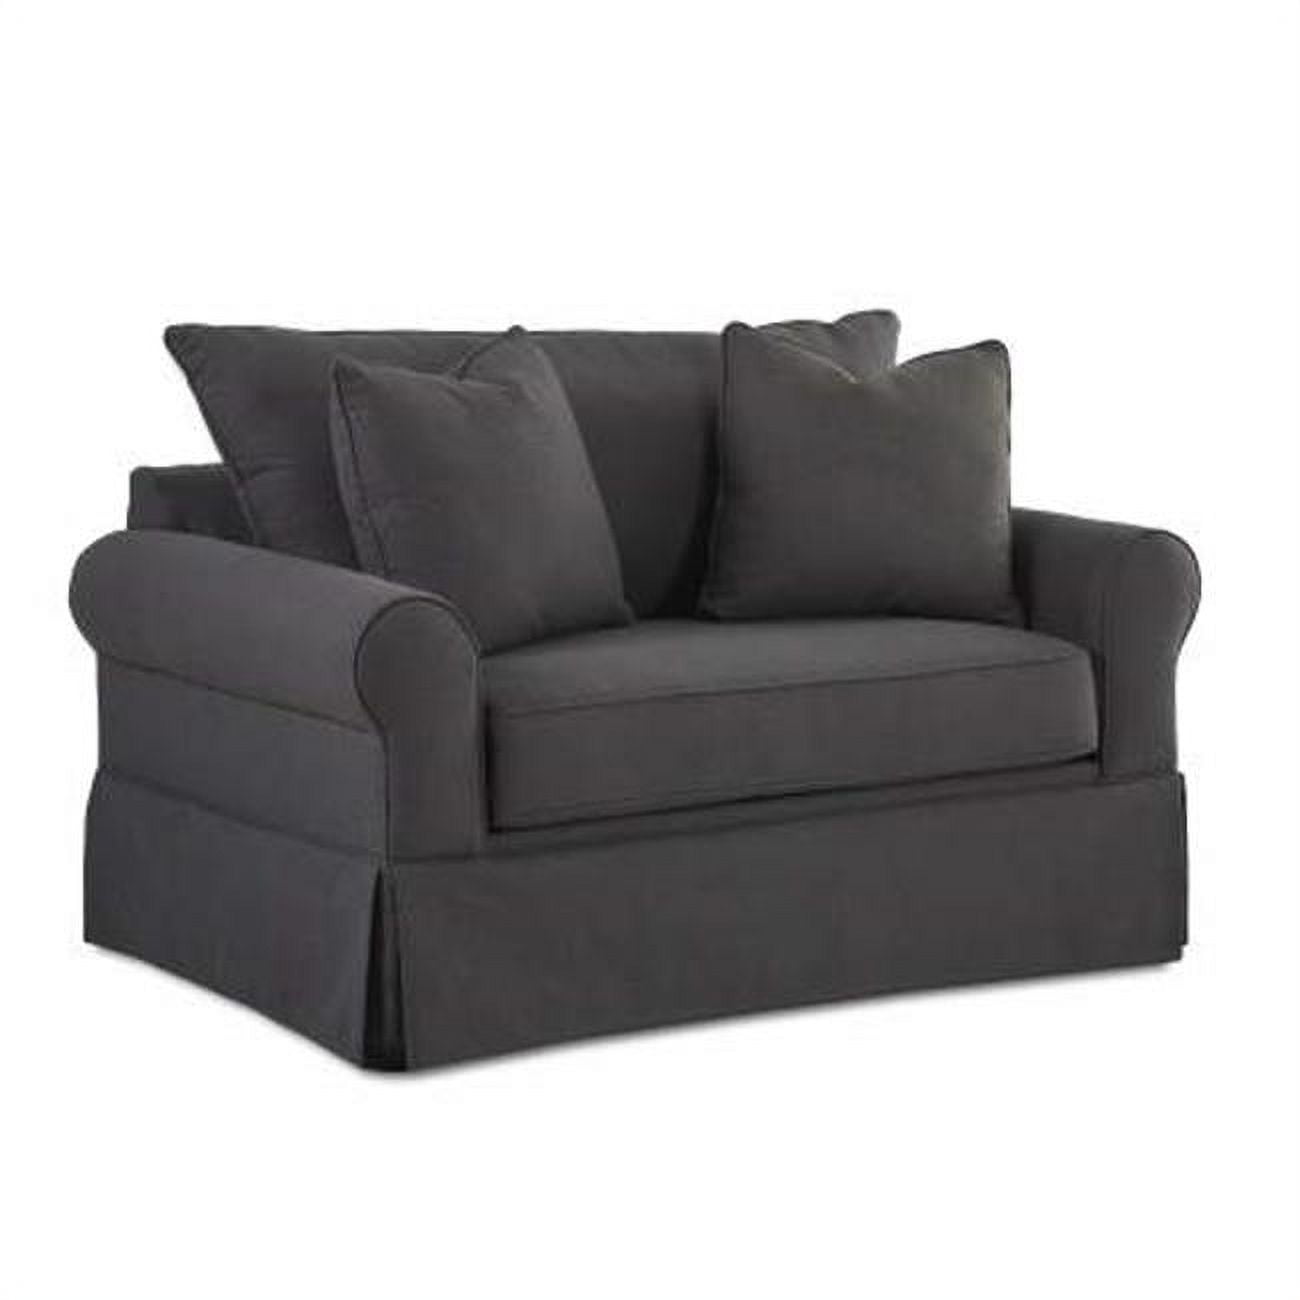 53 with Uphol Furniture 12013376911 35 Chair in. x Polyester Sleeper Dreamquest Klaussner 36 x Brook